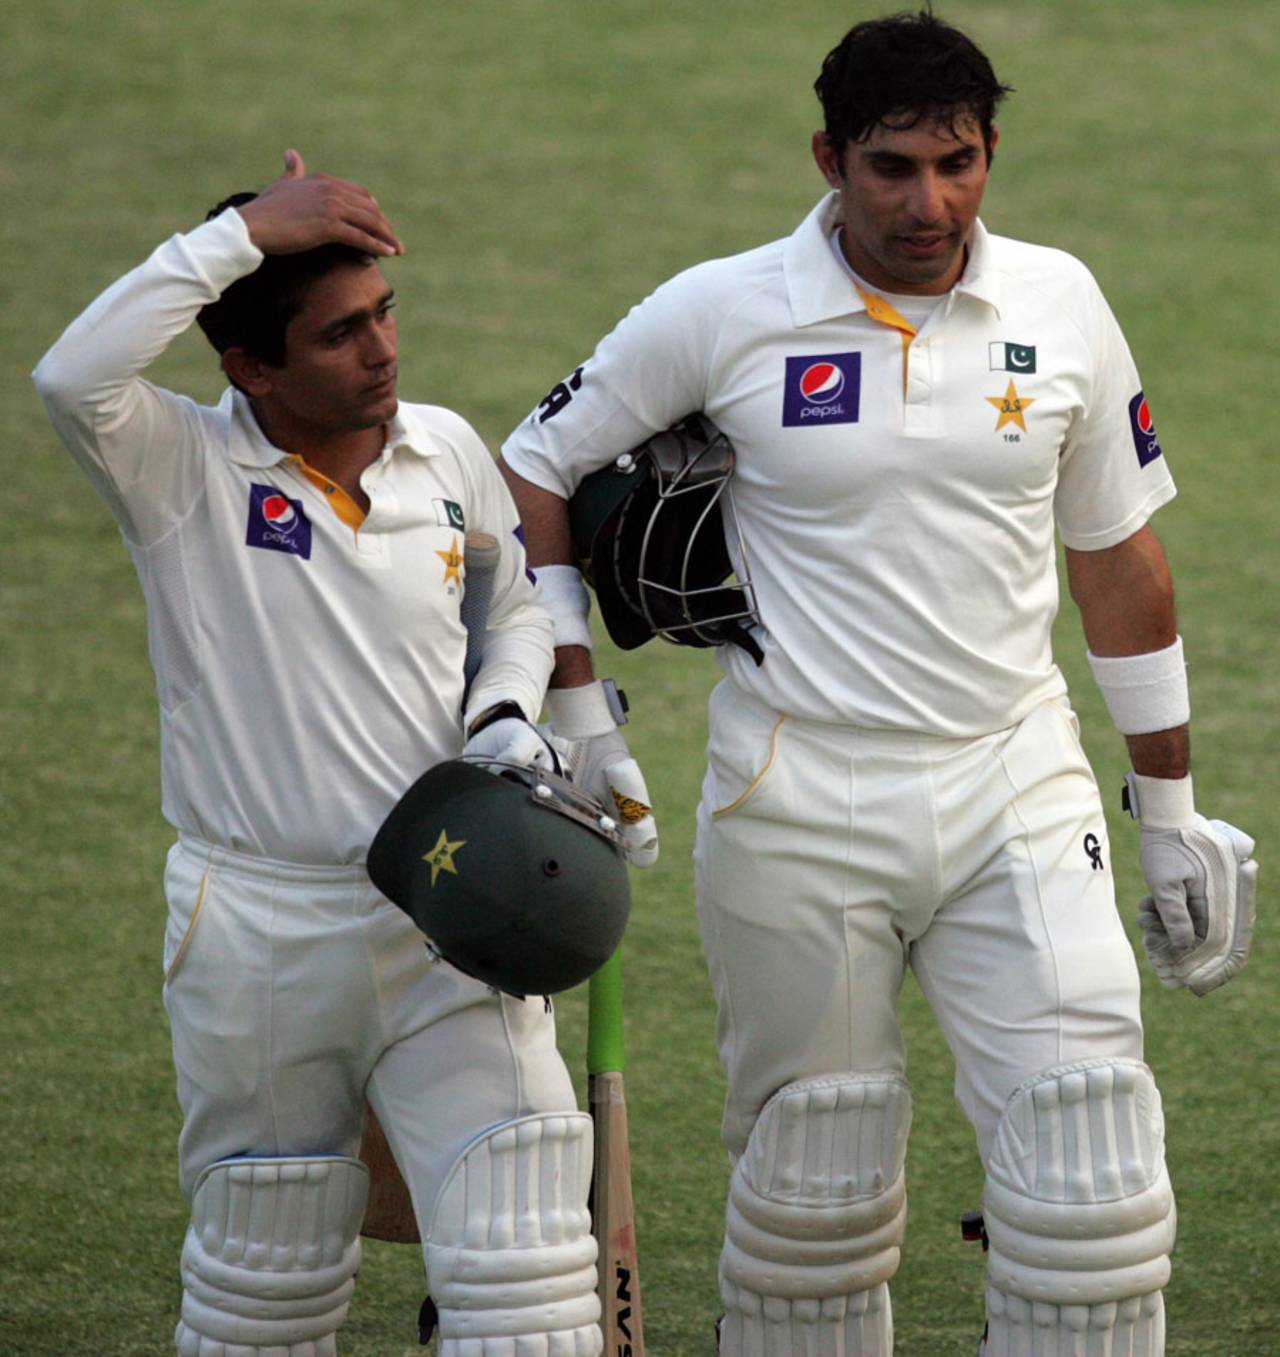 Misbah-ul-Haq and Adnan Akmal walk off the pitch at the end of the day, Zimbabwe v Pakistan, 2nd Test, Harare, 4th day, September 13, 2013